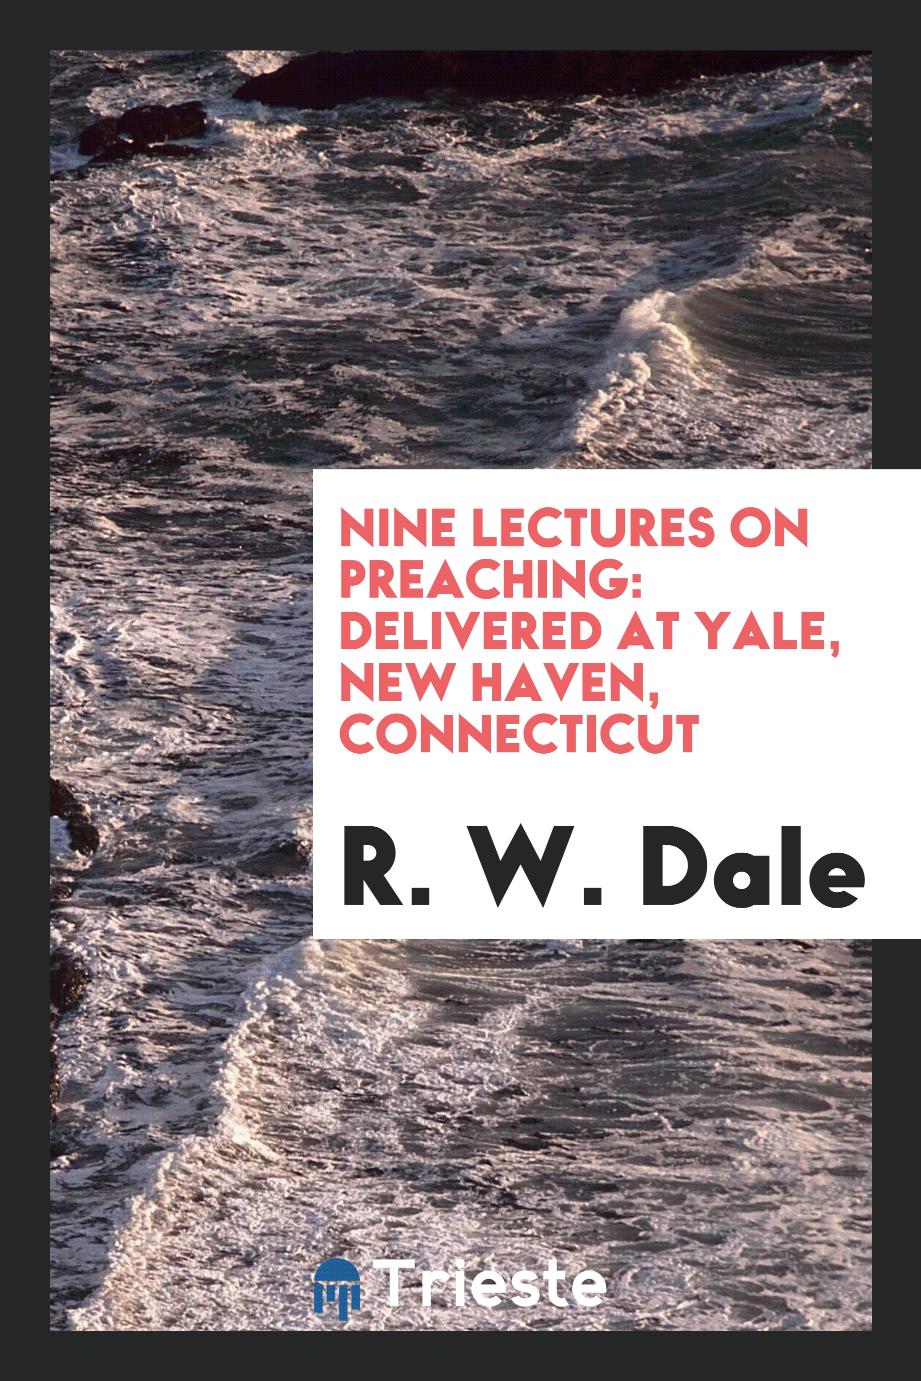 R.  W. Dale - Nine Lectures on Preaching: Delivered at Yale, New Haven, Connecticut